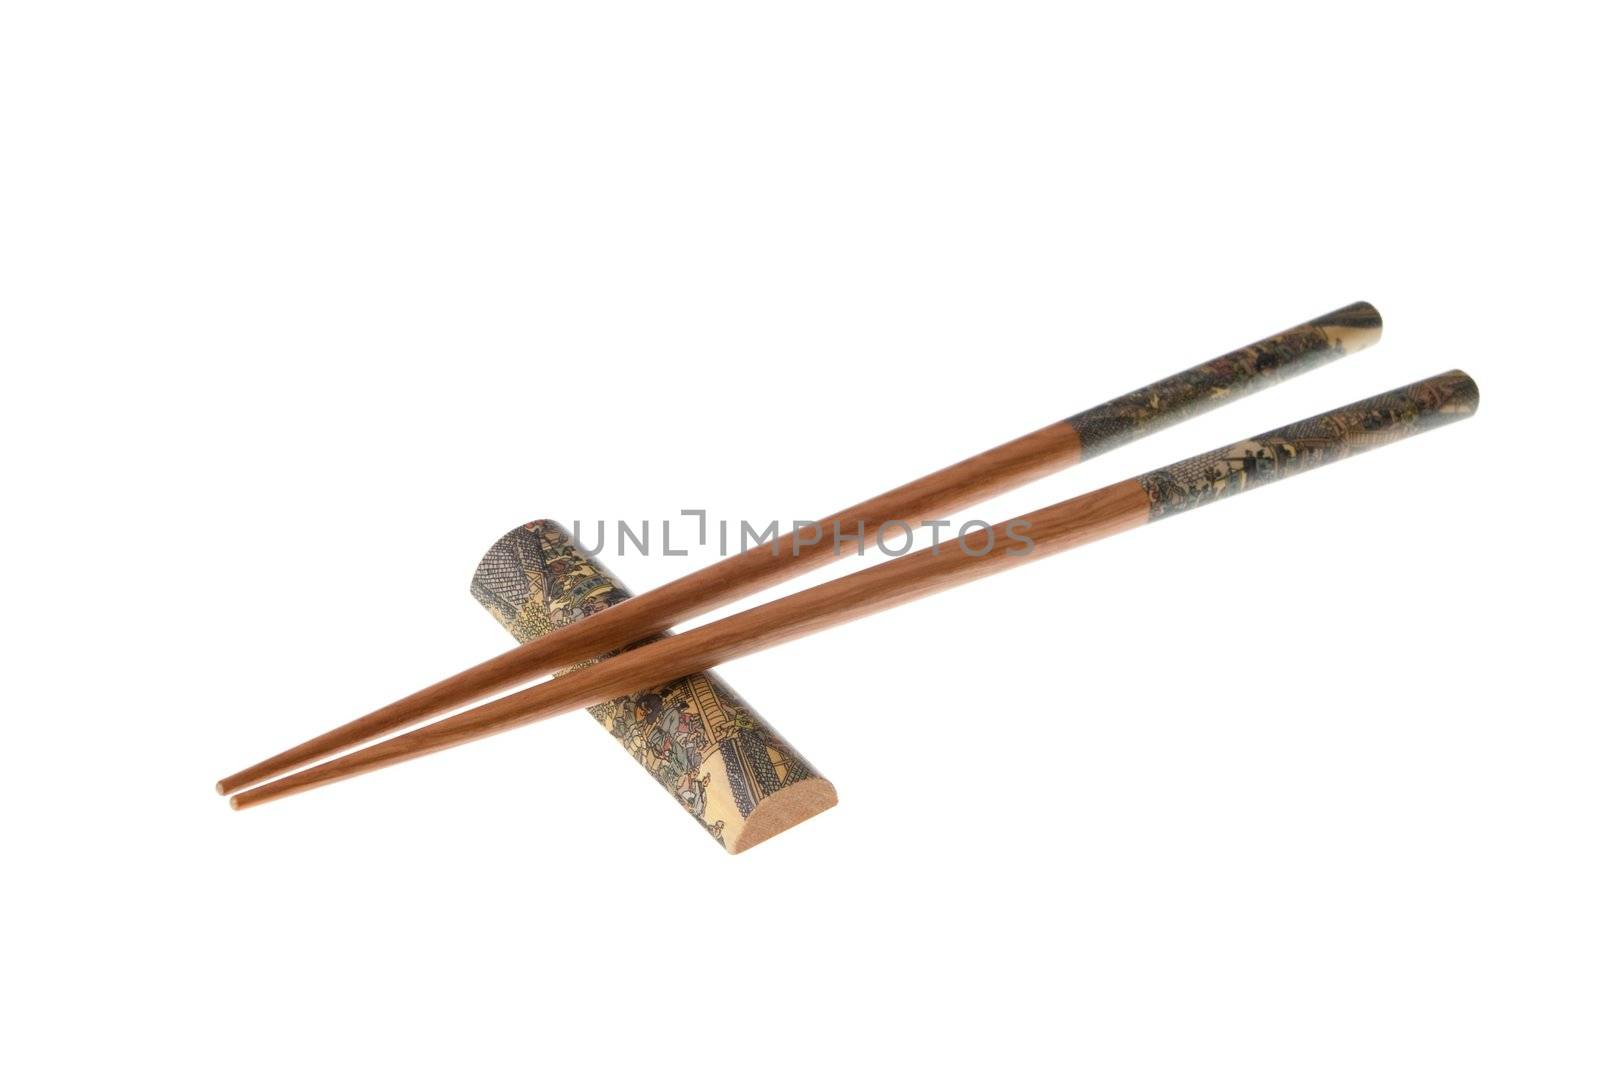 Two wooden chopsticks with holder. Sticks and holder are decorated with temple theme ornamentation. Isolated on white